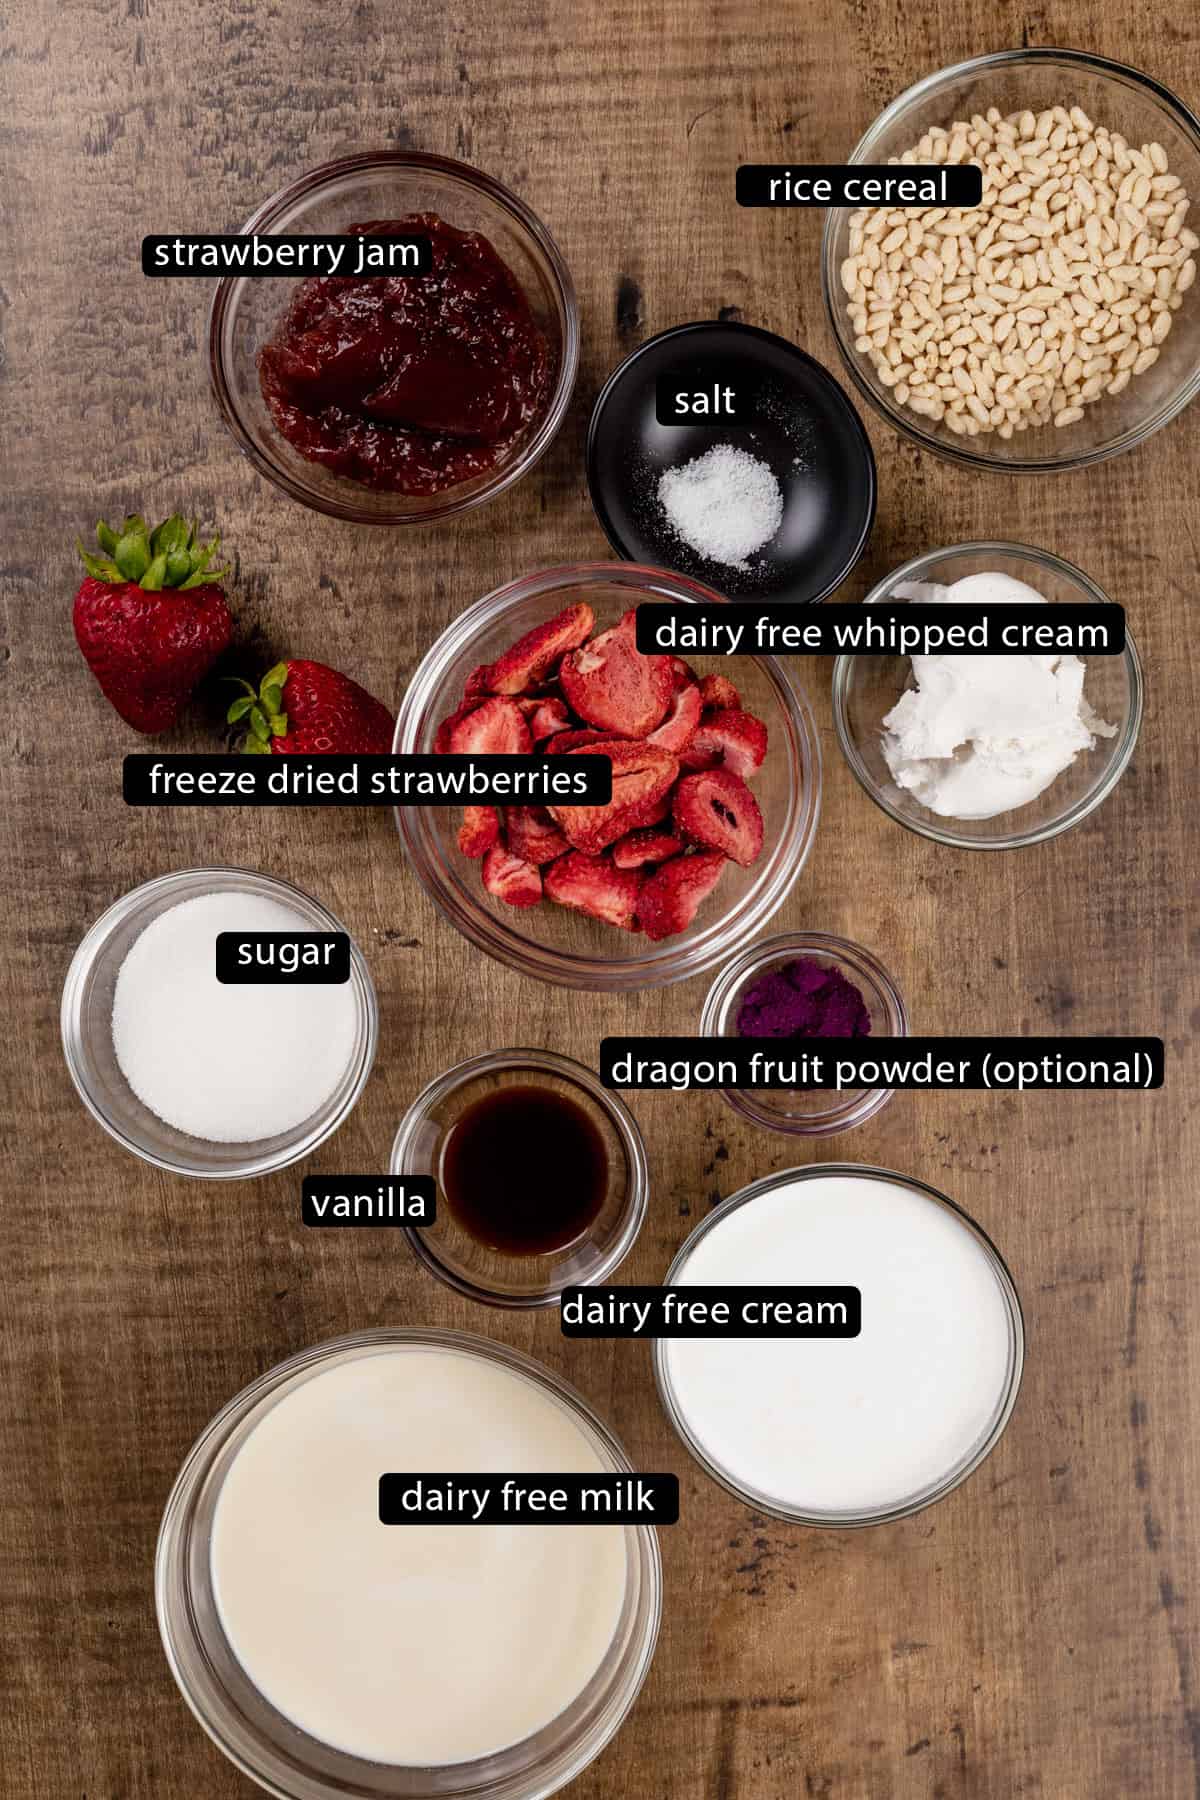 Ingredients for strawberry shortcake ice cream bars in various glass bowls on a wood table. Black and white labels have been added to name each ingredient like strawberries and vanilla.